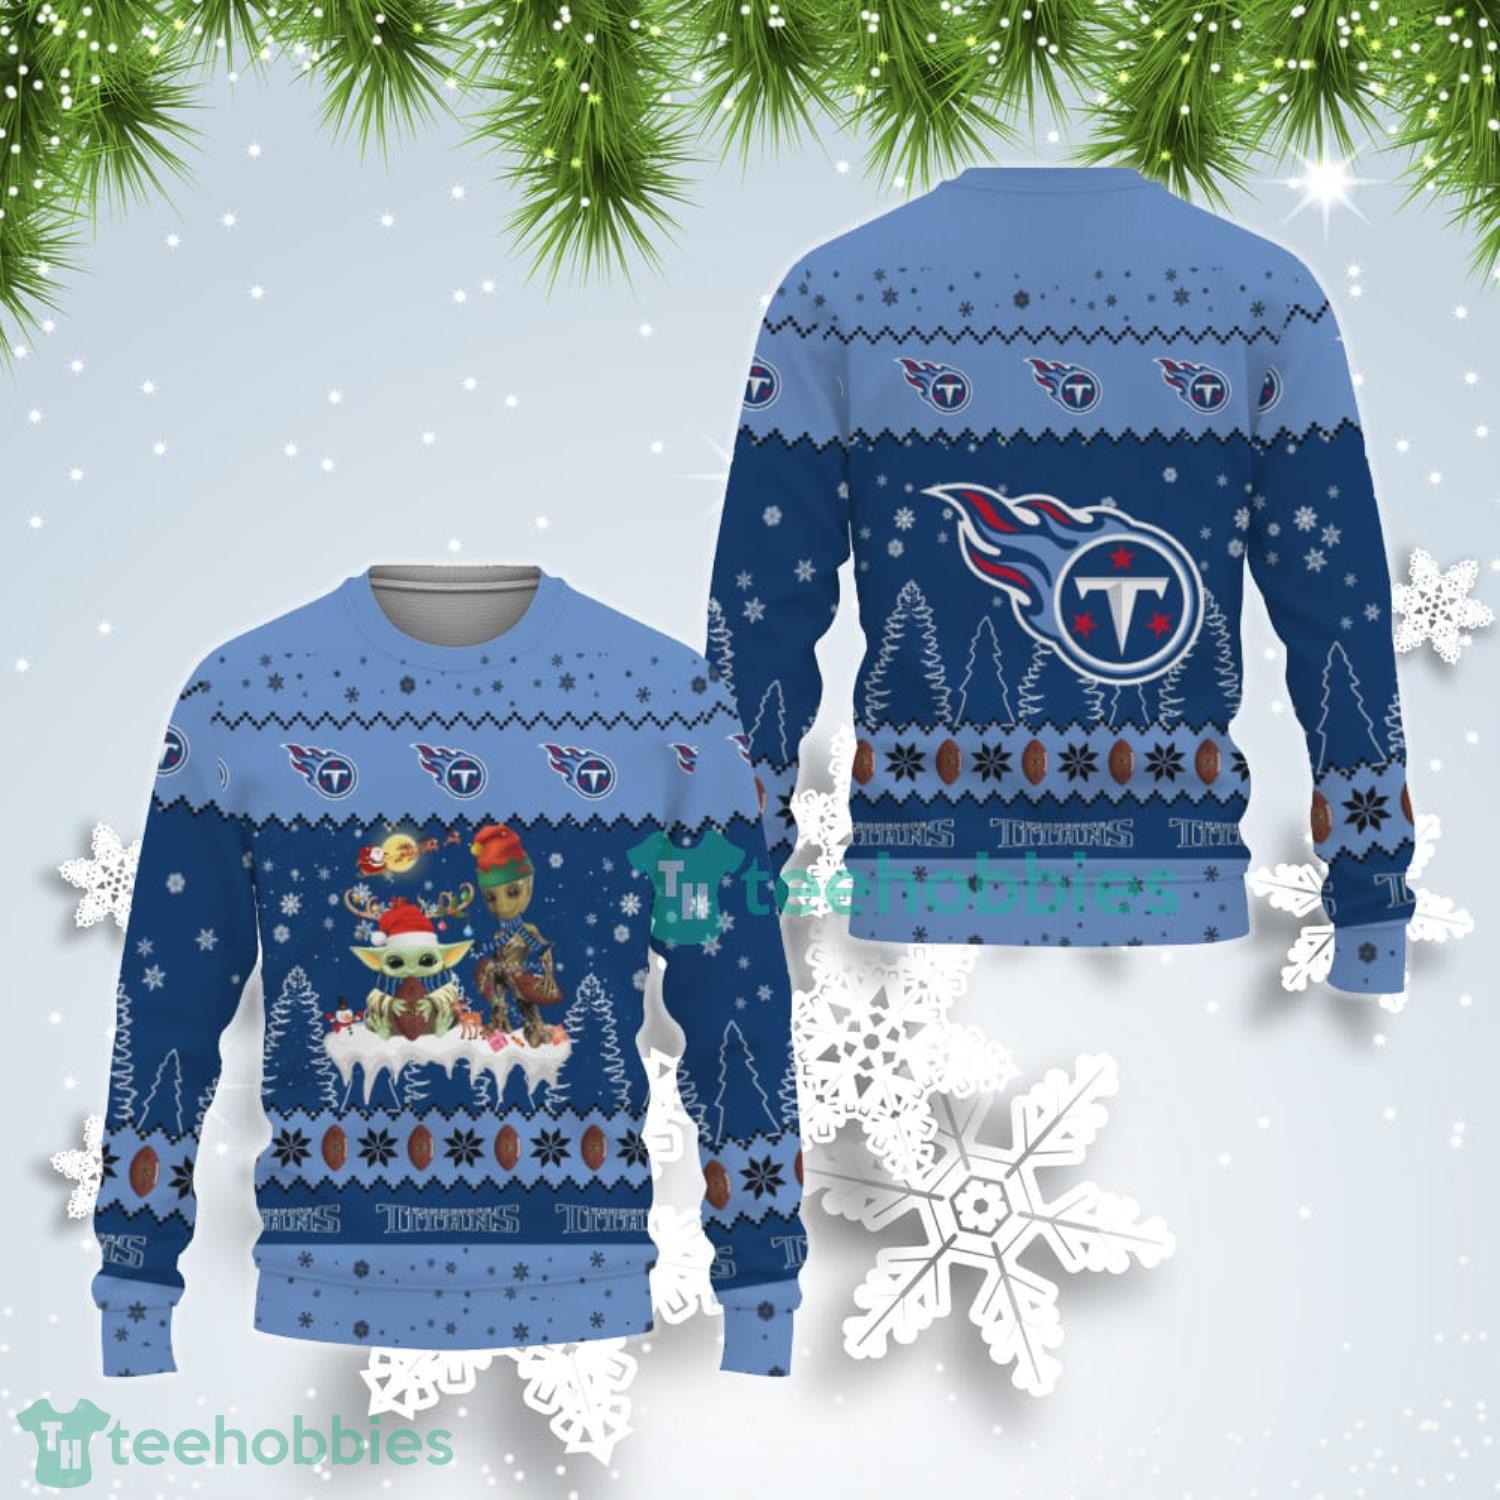 Tis The Season Christmas Baby Yoda Groot Tennessee Titans Cute Christmas Gift Ugly Christmas Sweater Product Photo 1